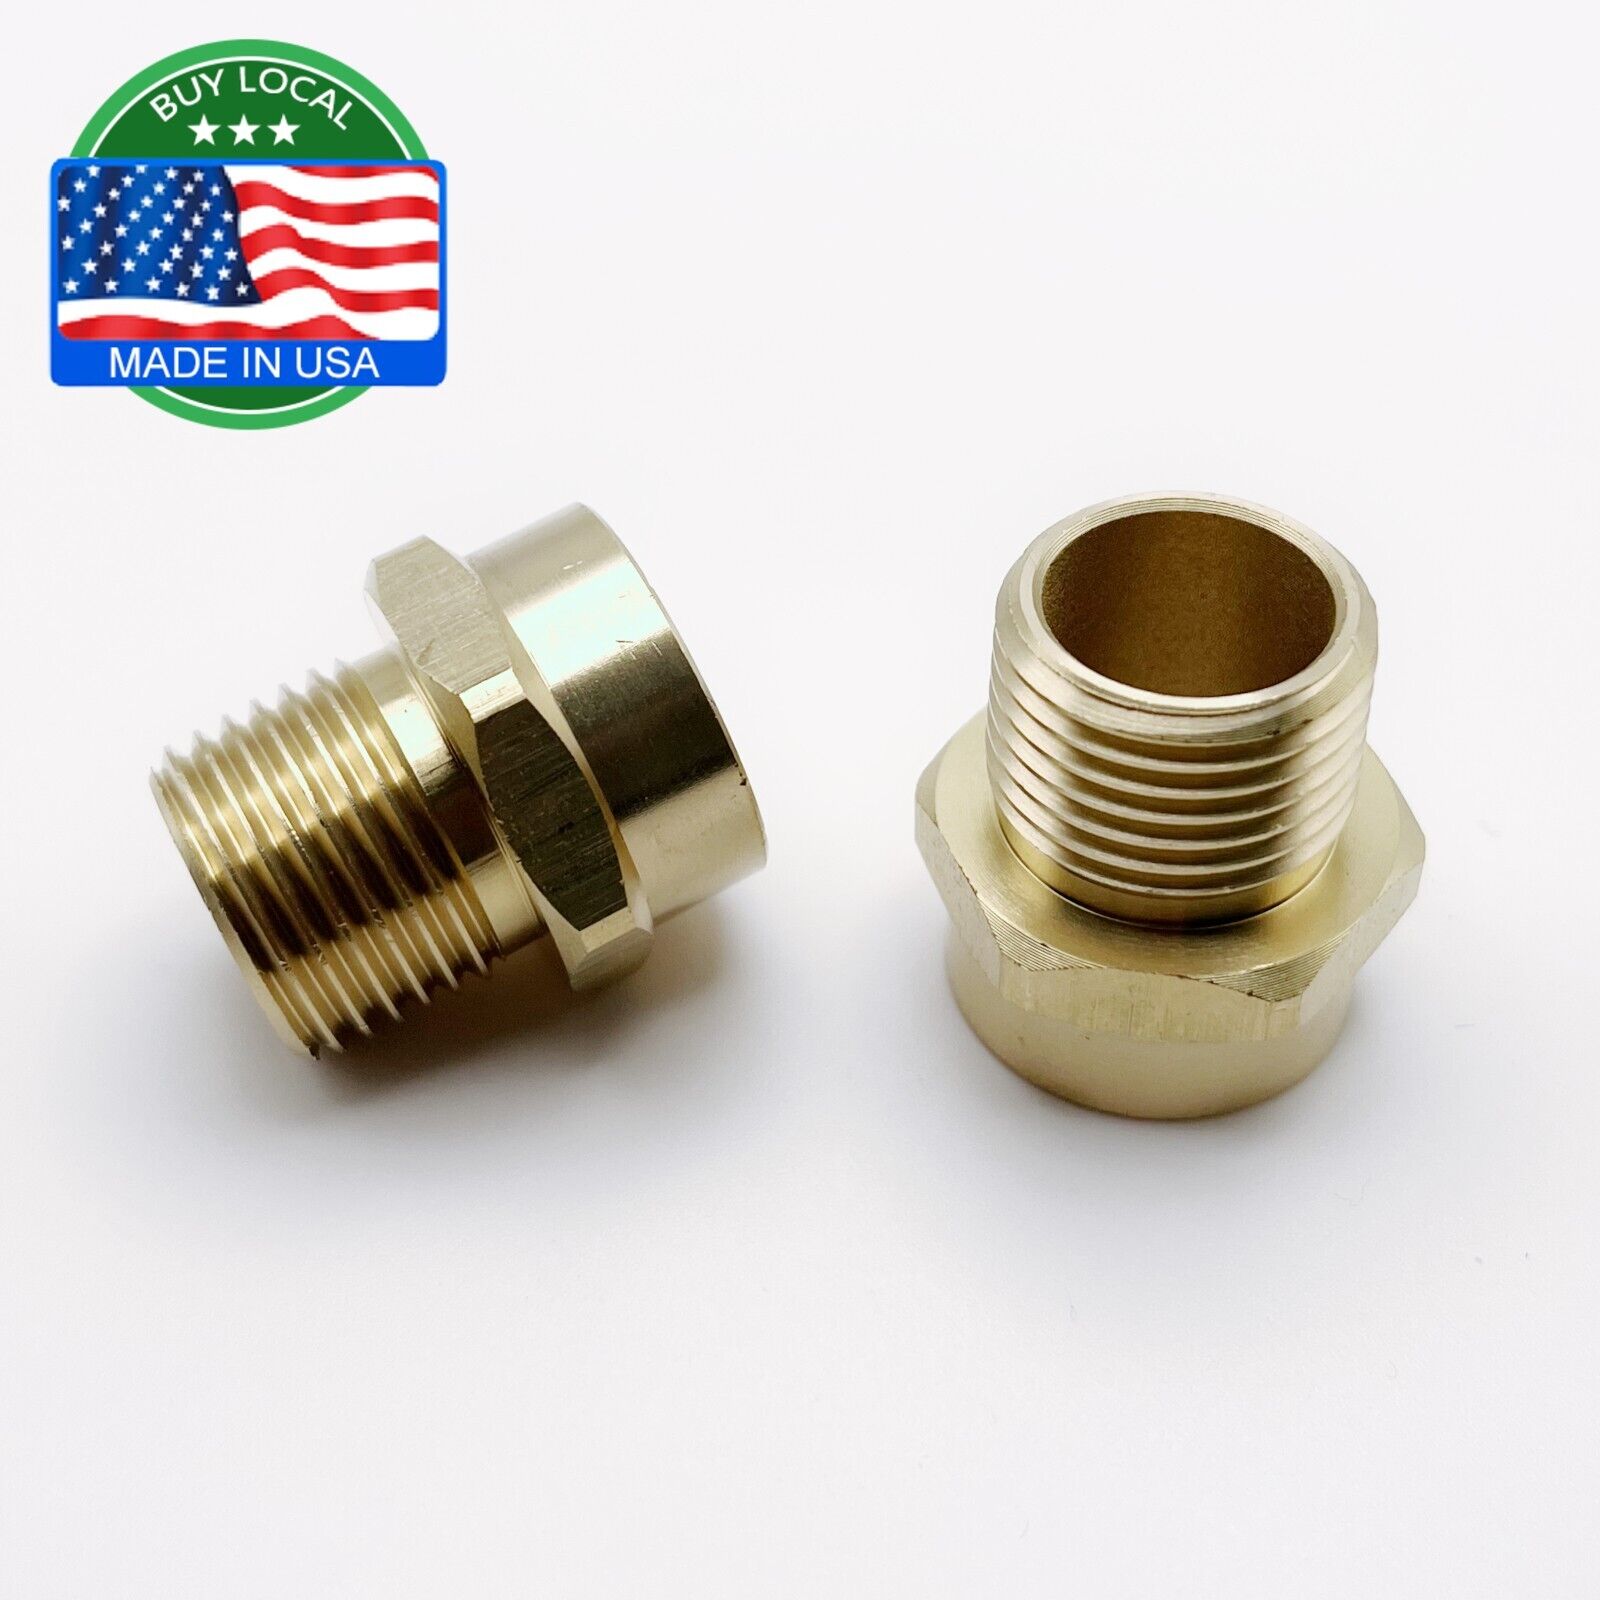 1/2” G Thread (BSP) Female to 1/2” NPT Male Connector Brass BSP to NPT Adapter